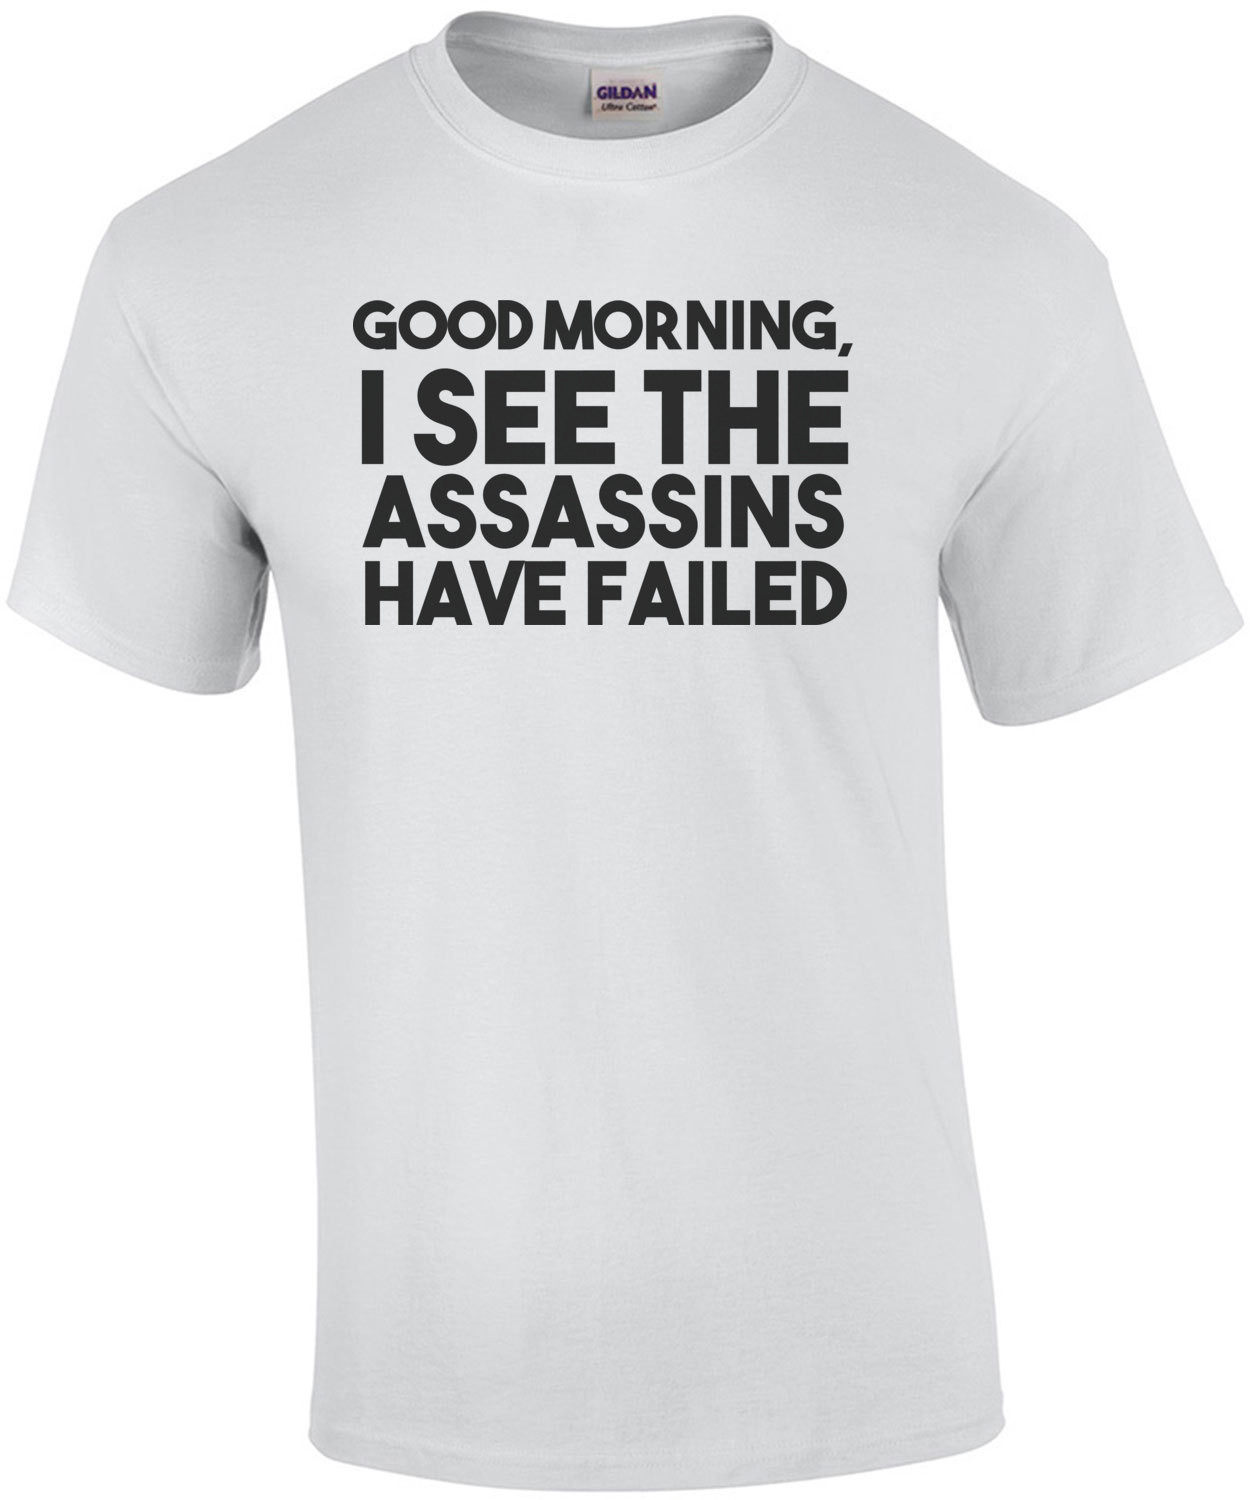 Good morning, I see the assassins have failed t-shirt